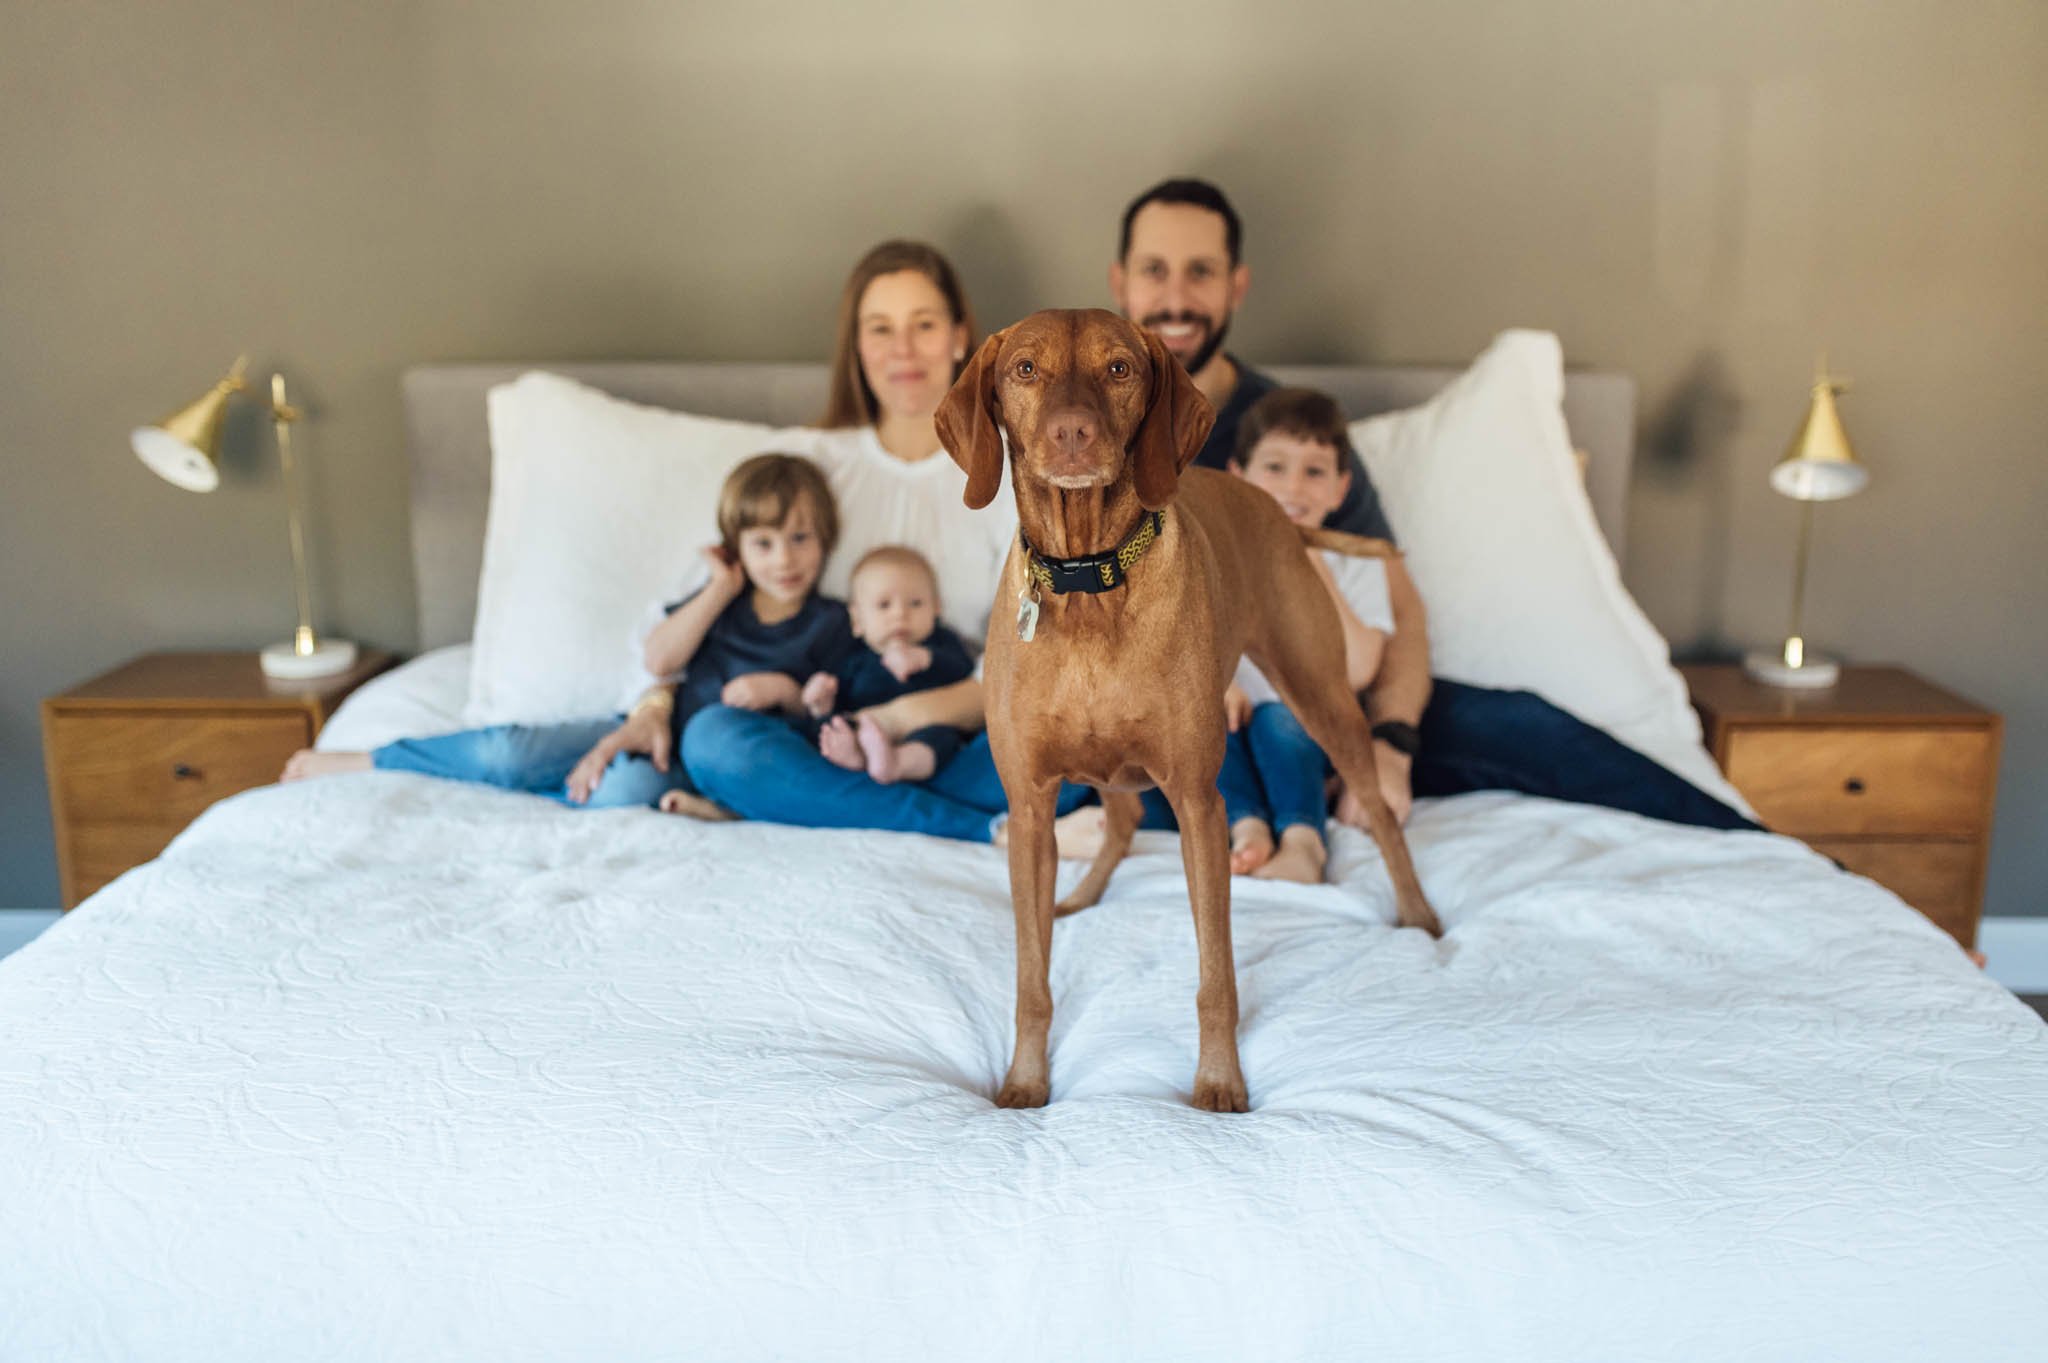 Dog walks in front of picture of family on bed